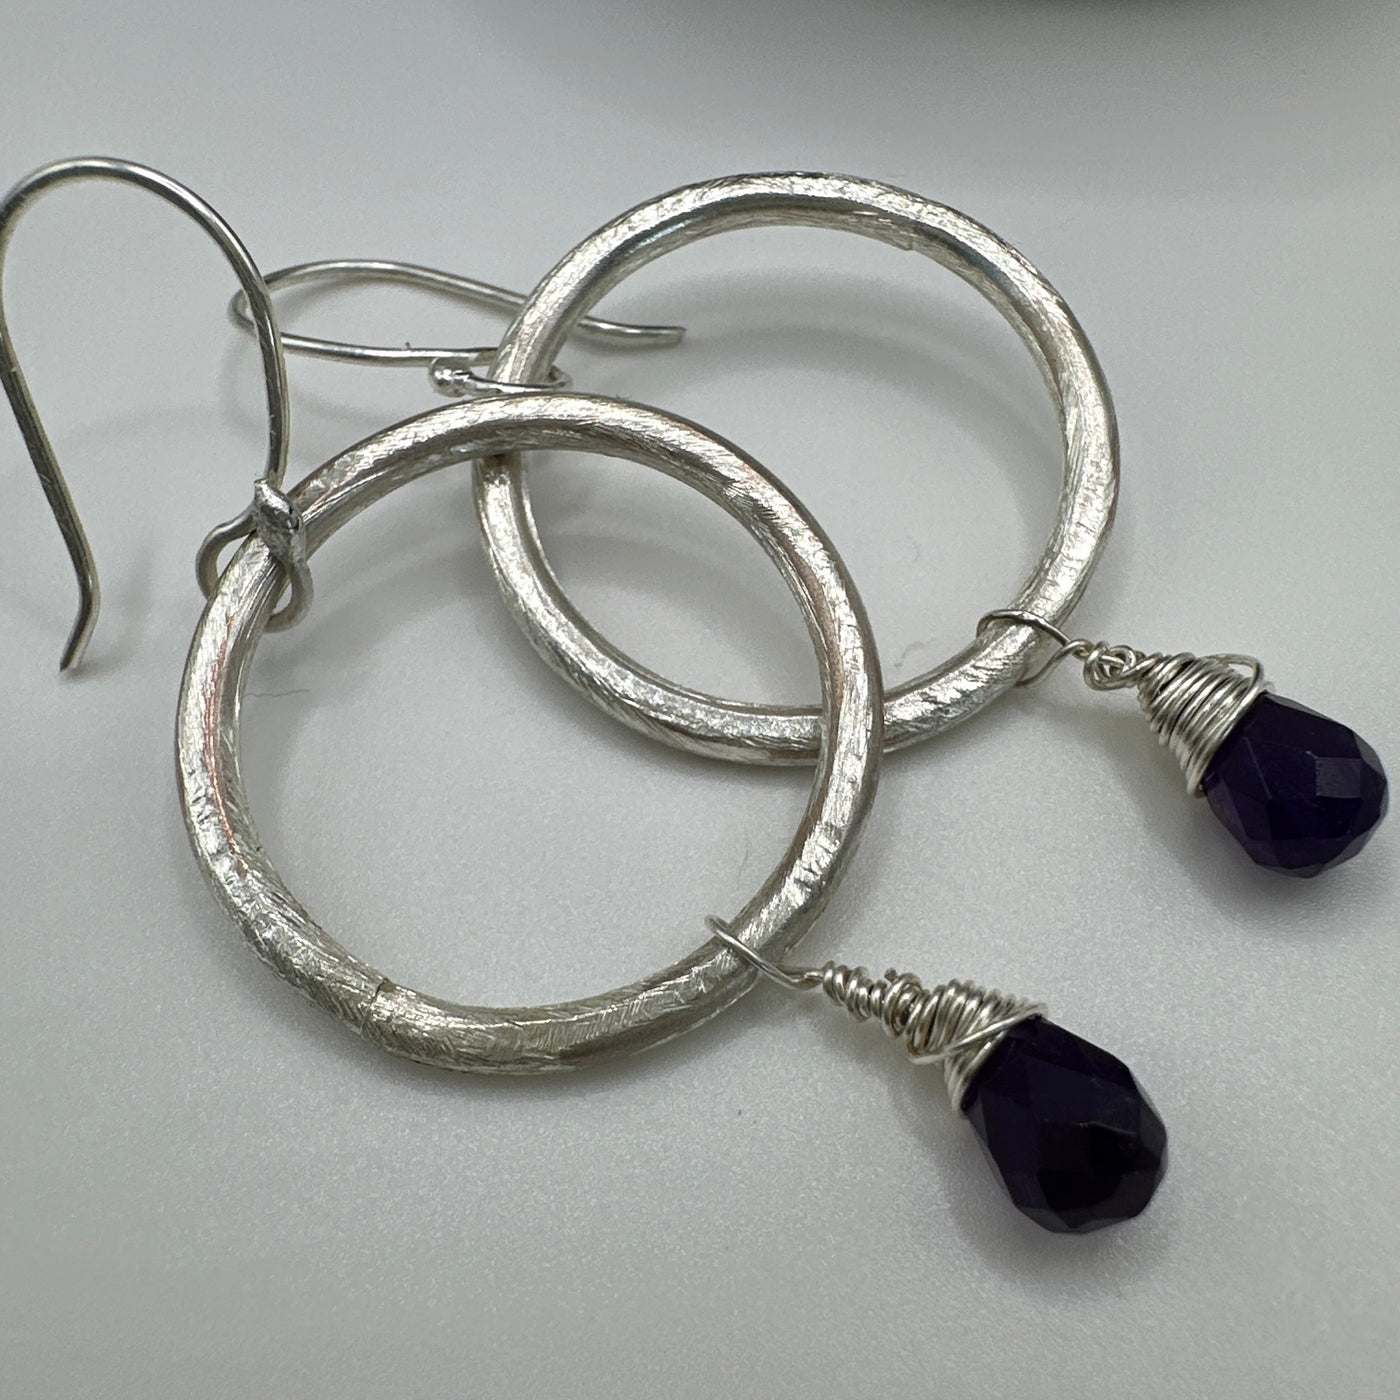 Silver round rings and amethyst briolette earrings